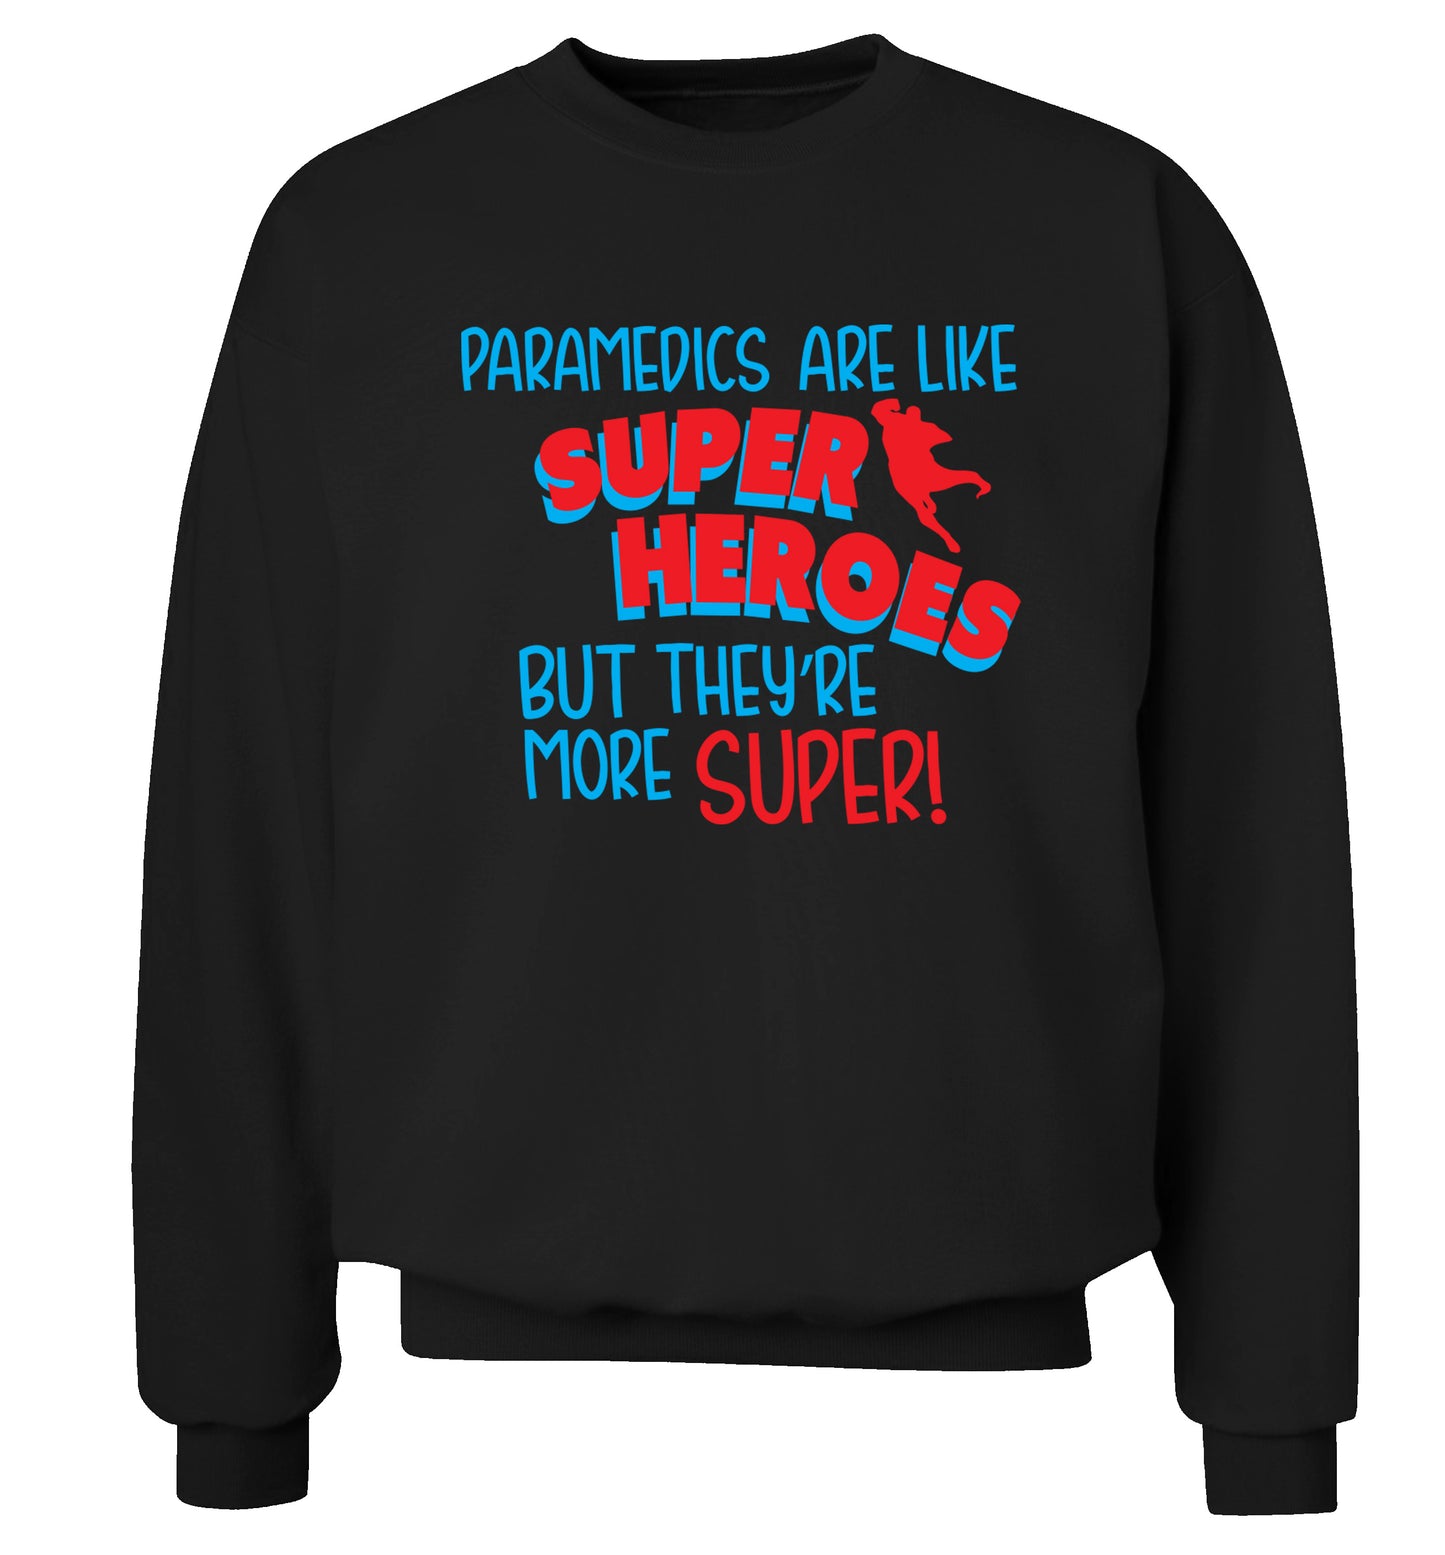 Paramedics are like superheros but they're more super Adult's unisex black Sweater 2XL